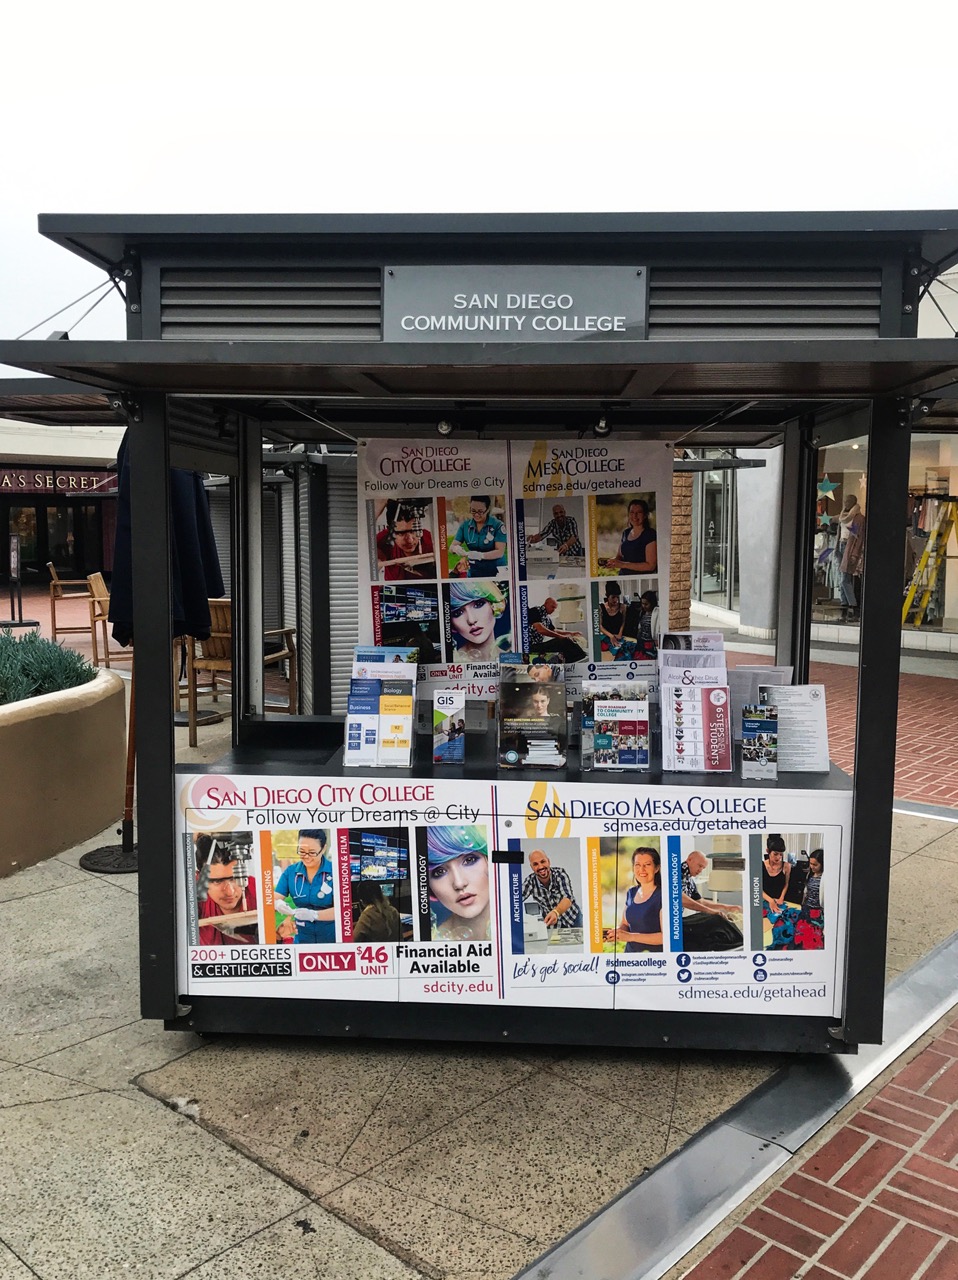 District ramps up enrollment efforts with kiosk at Westfield Mission Valley